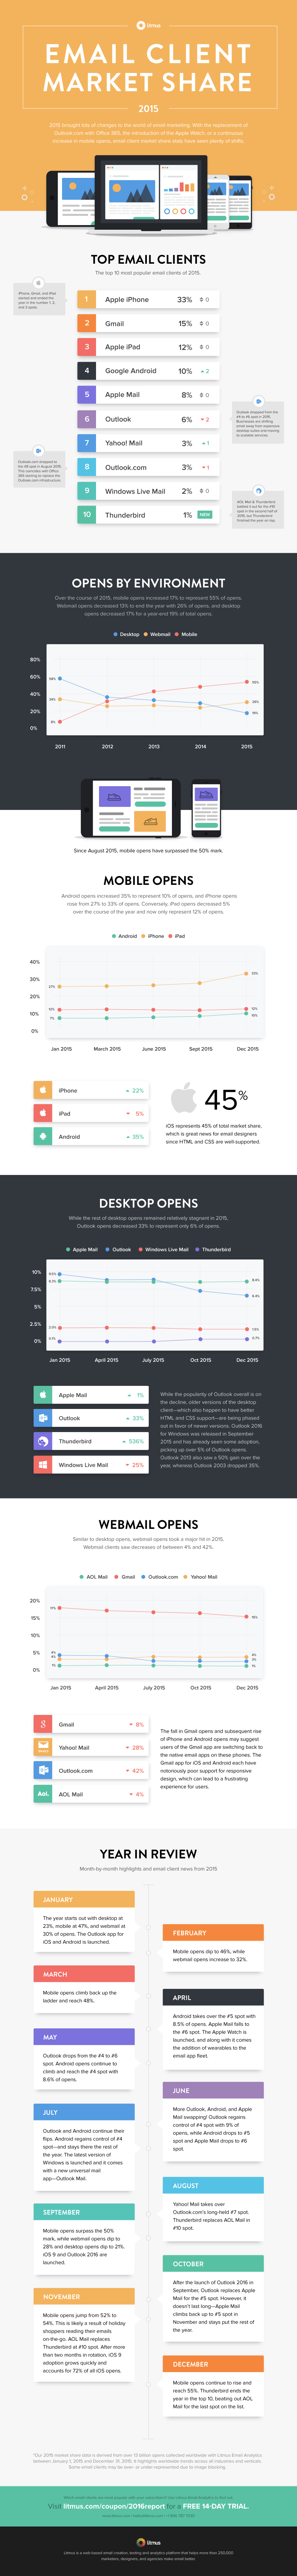 email-client-market-share-2015-001